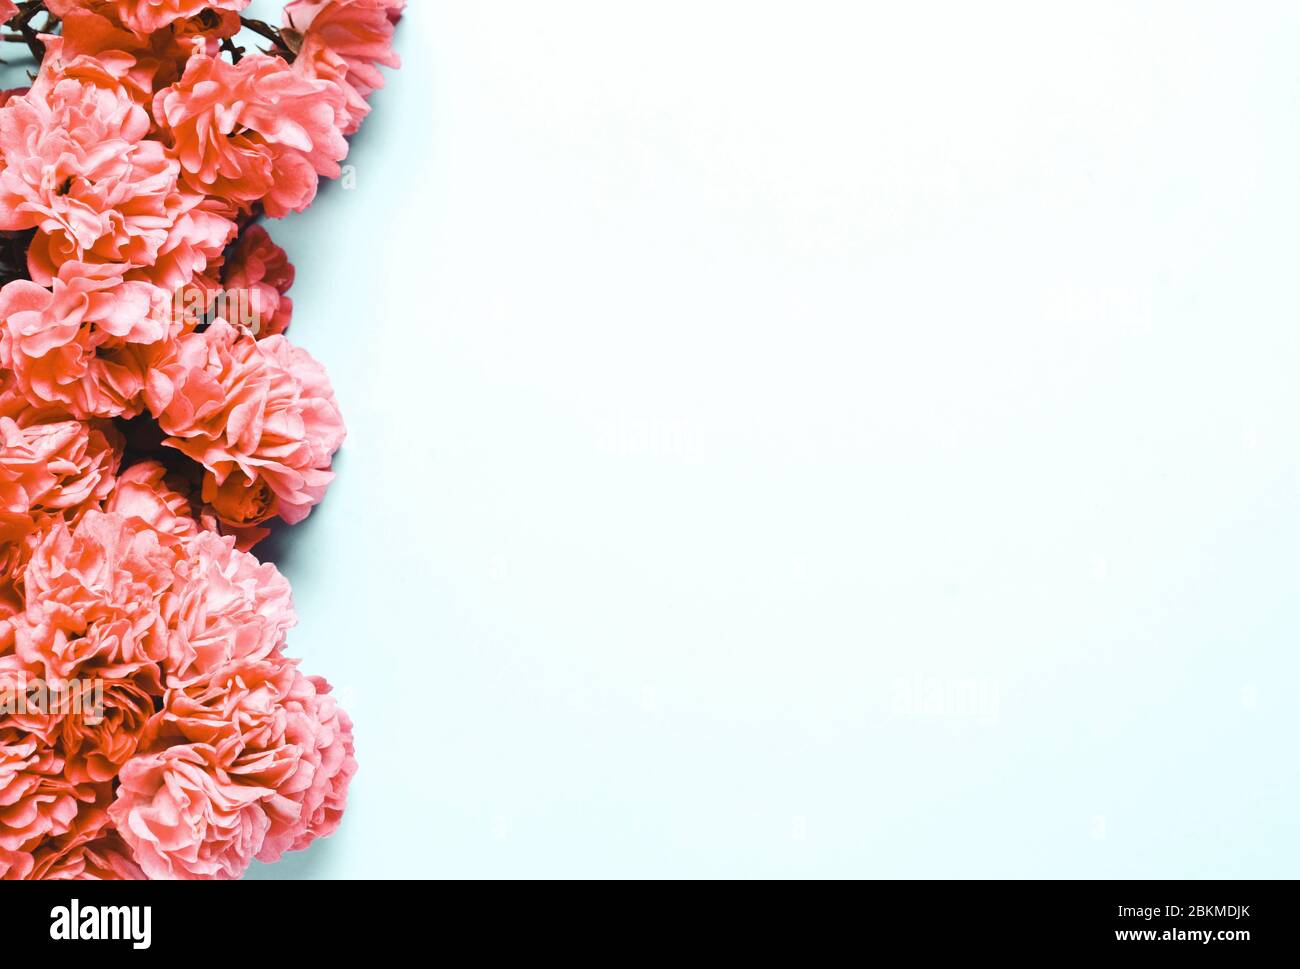 Composition of coral, pink flowers on blue background. Stock Photo